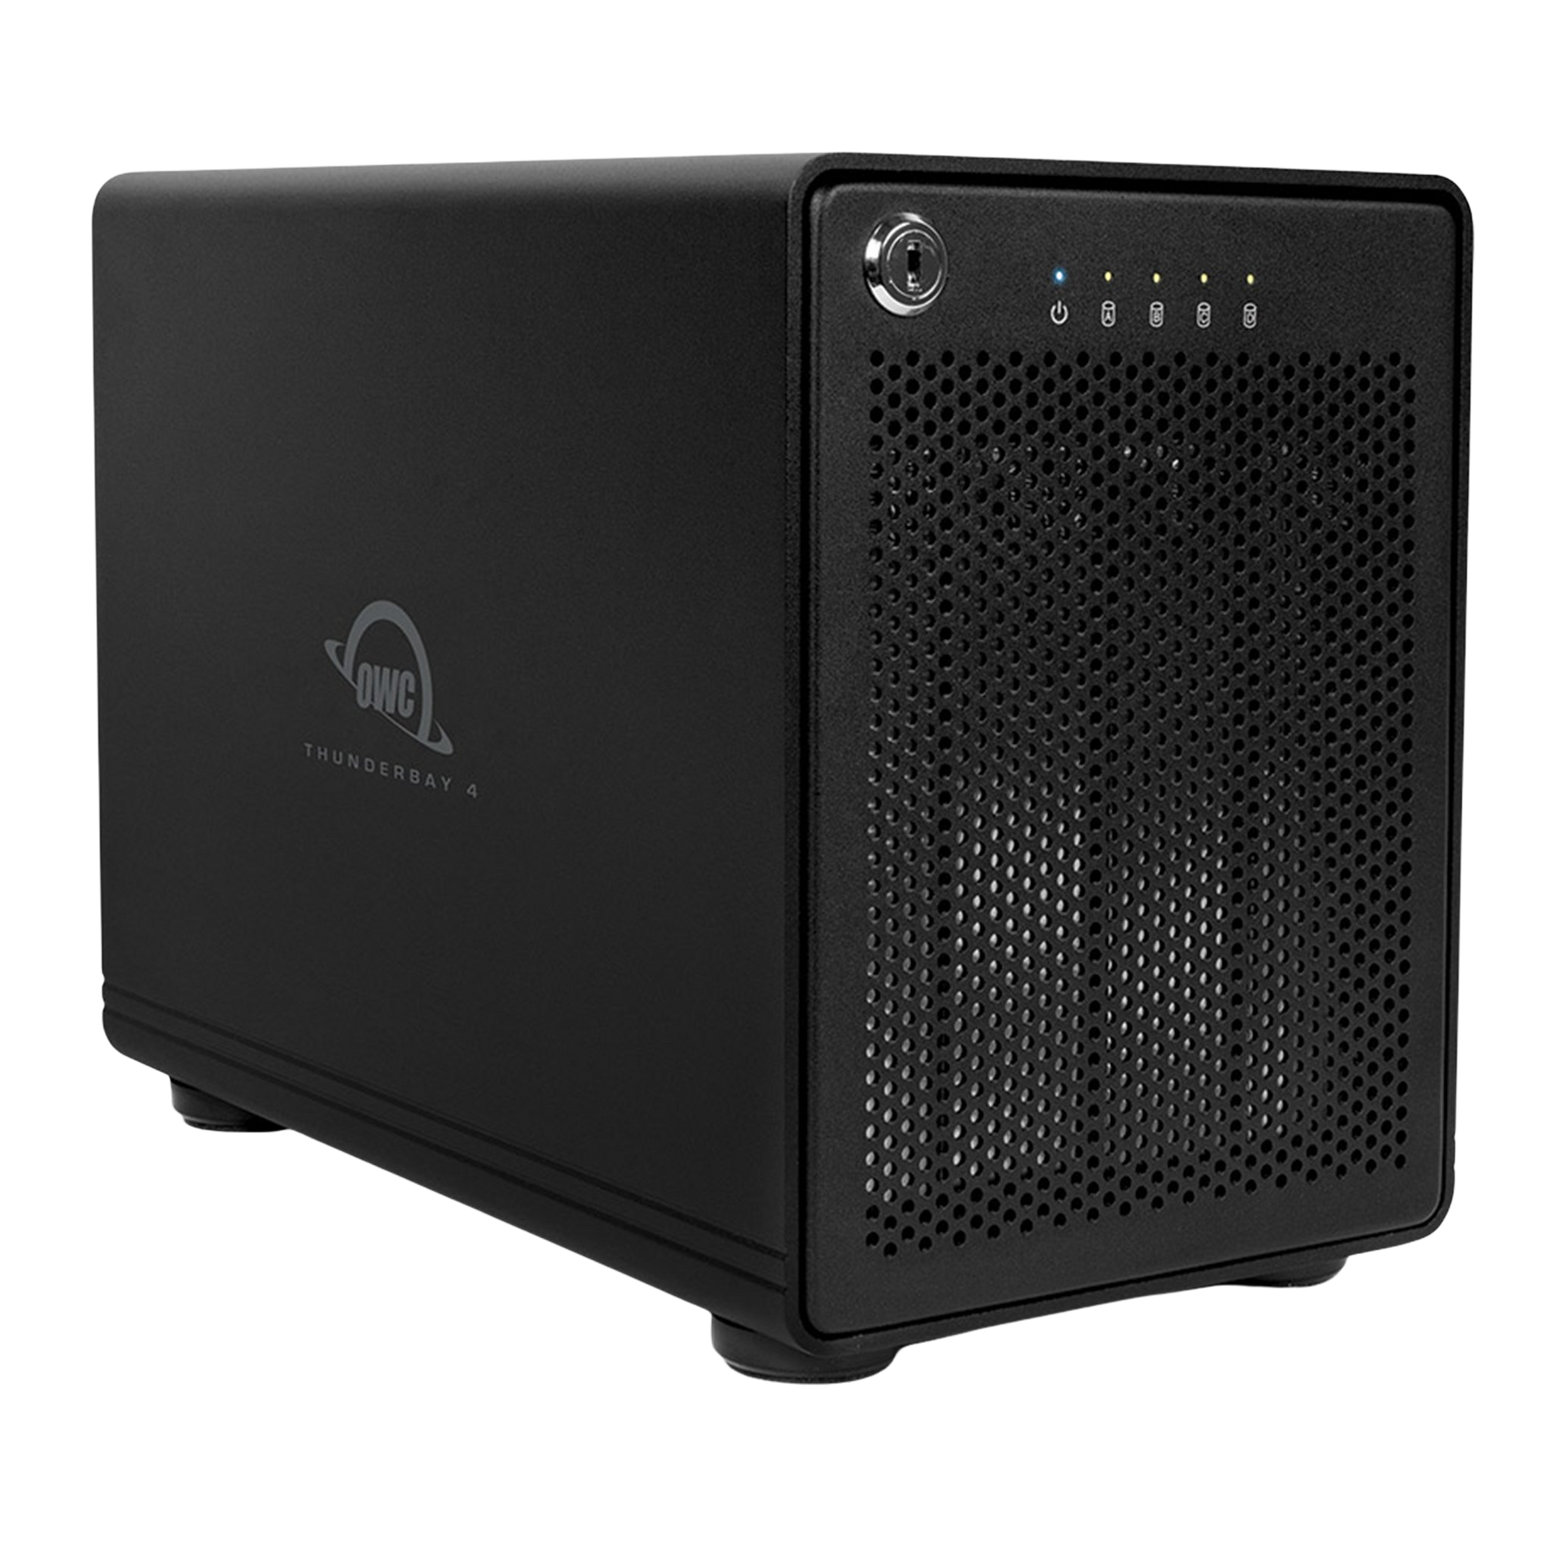 OWC ThunderBay 4 Enclosure (Thunderbolt 2 Model) with four 3.5" Drive Bays & Dual Thunderbolt 2 Ports - Discontinued